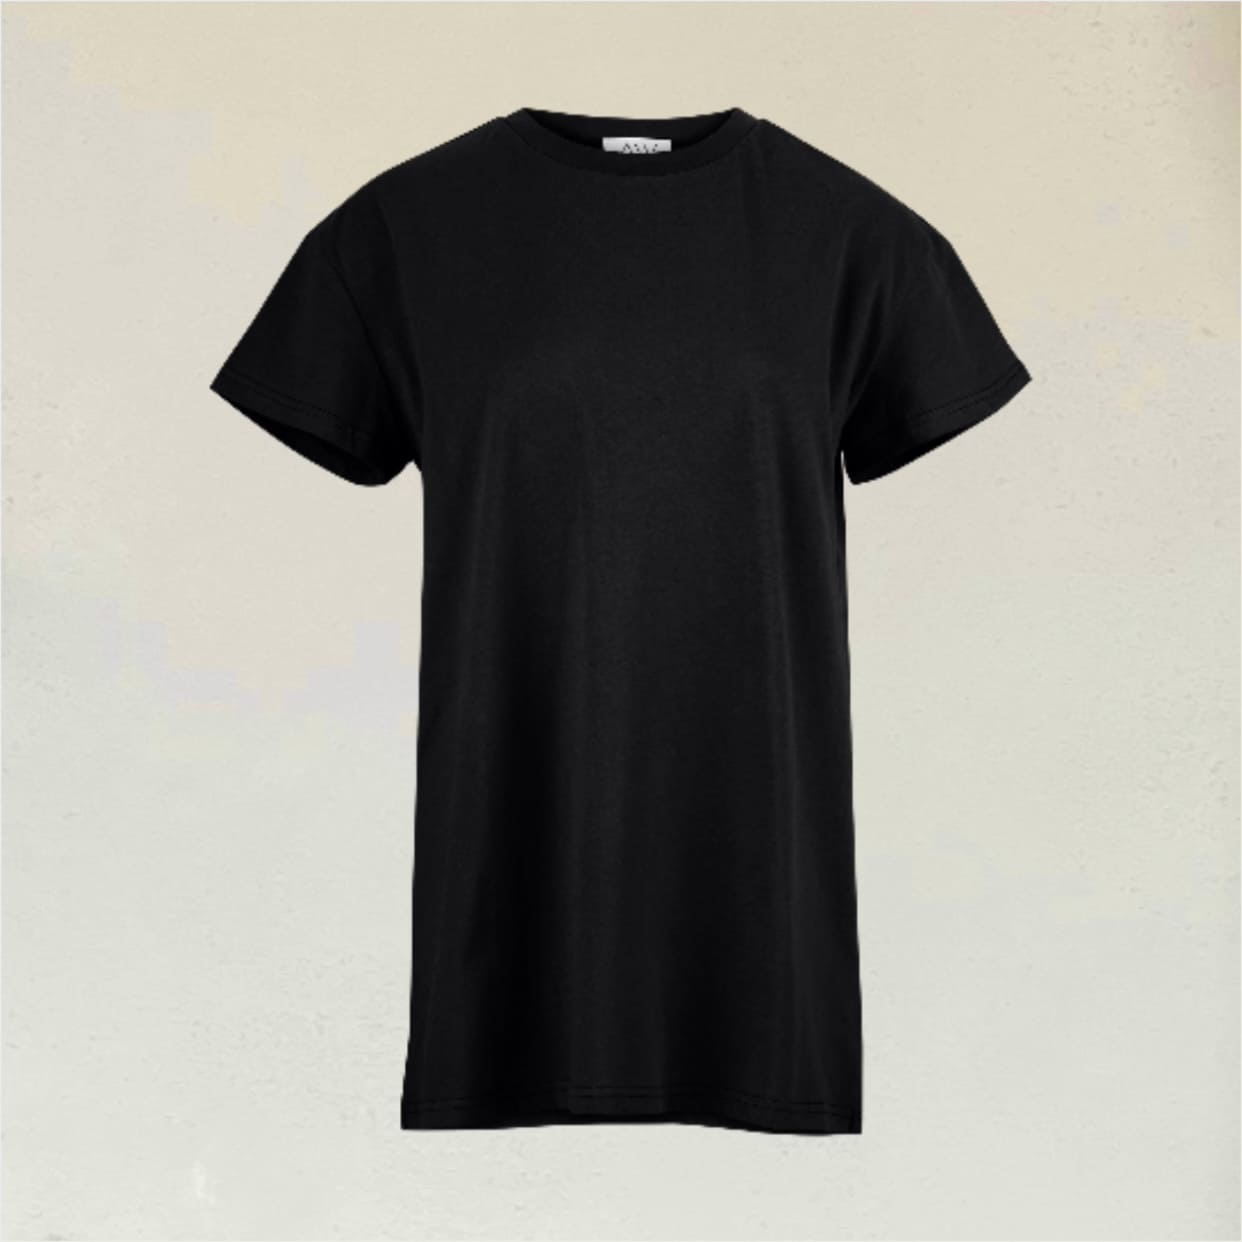 Black T-Shirt in front of beige background